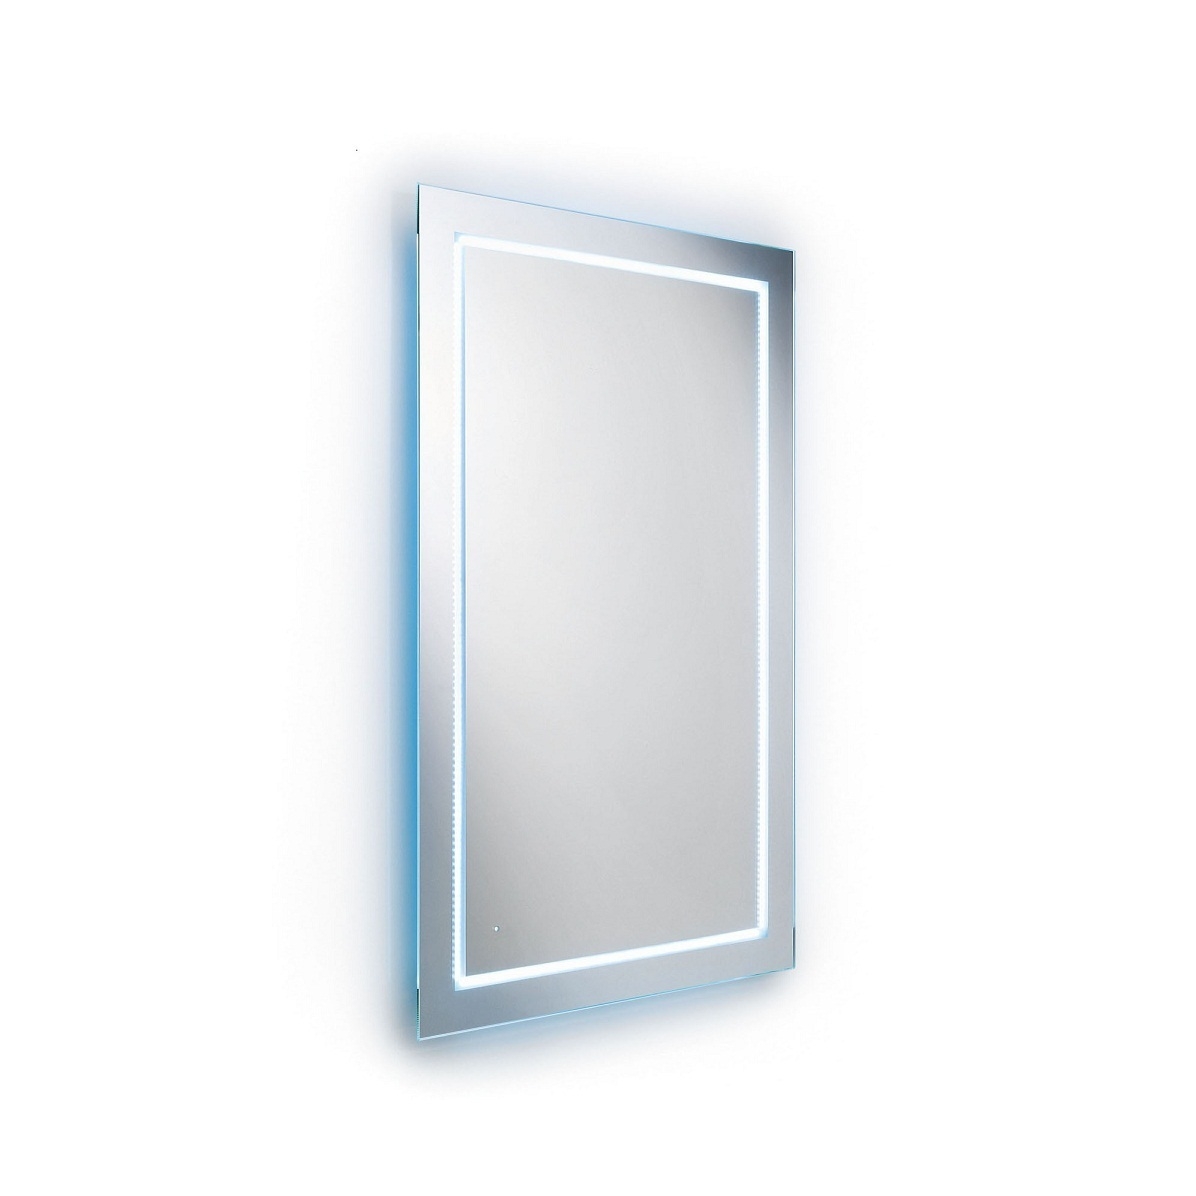 Speci 5686 mirror with LED light